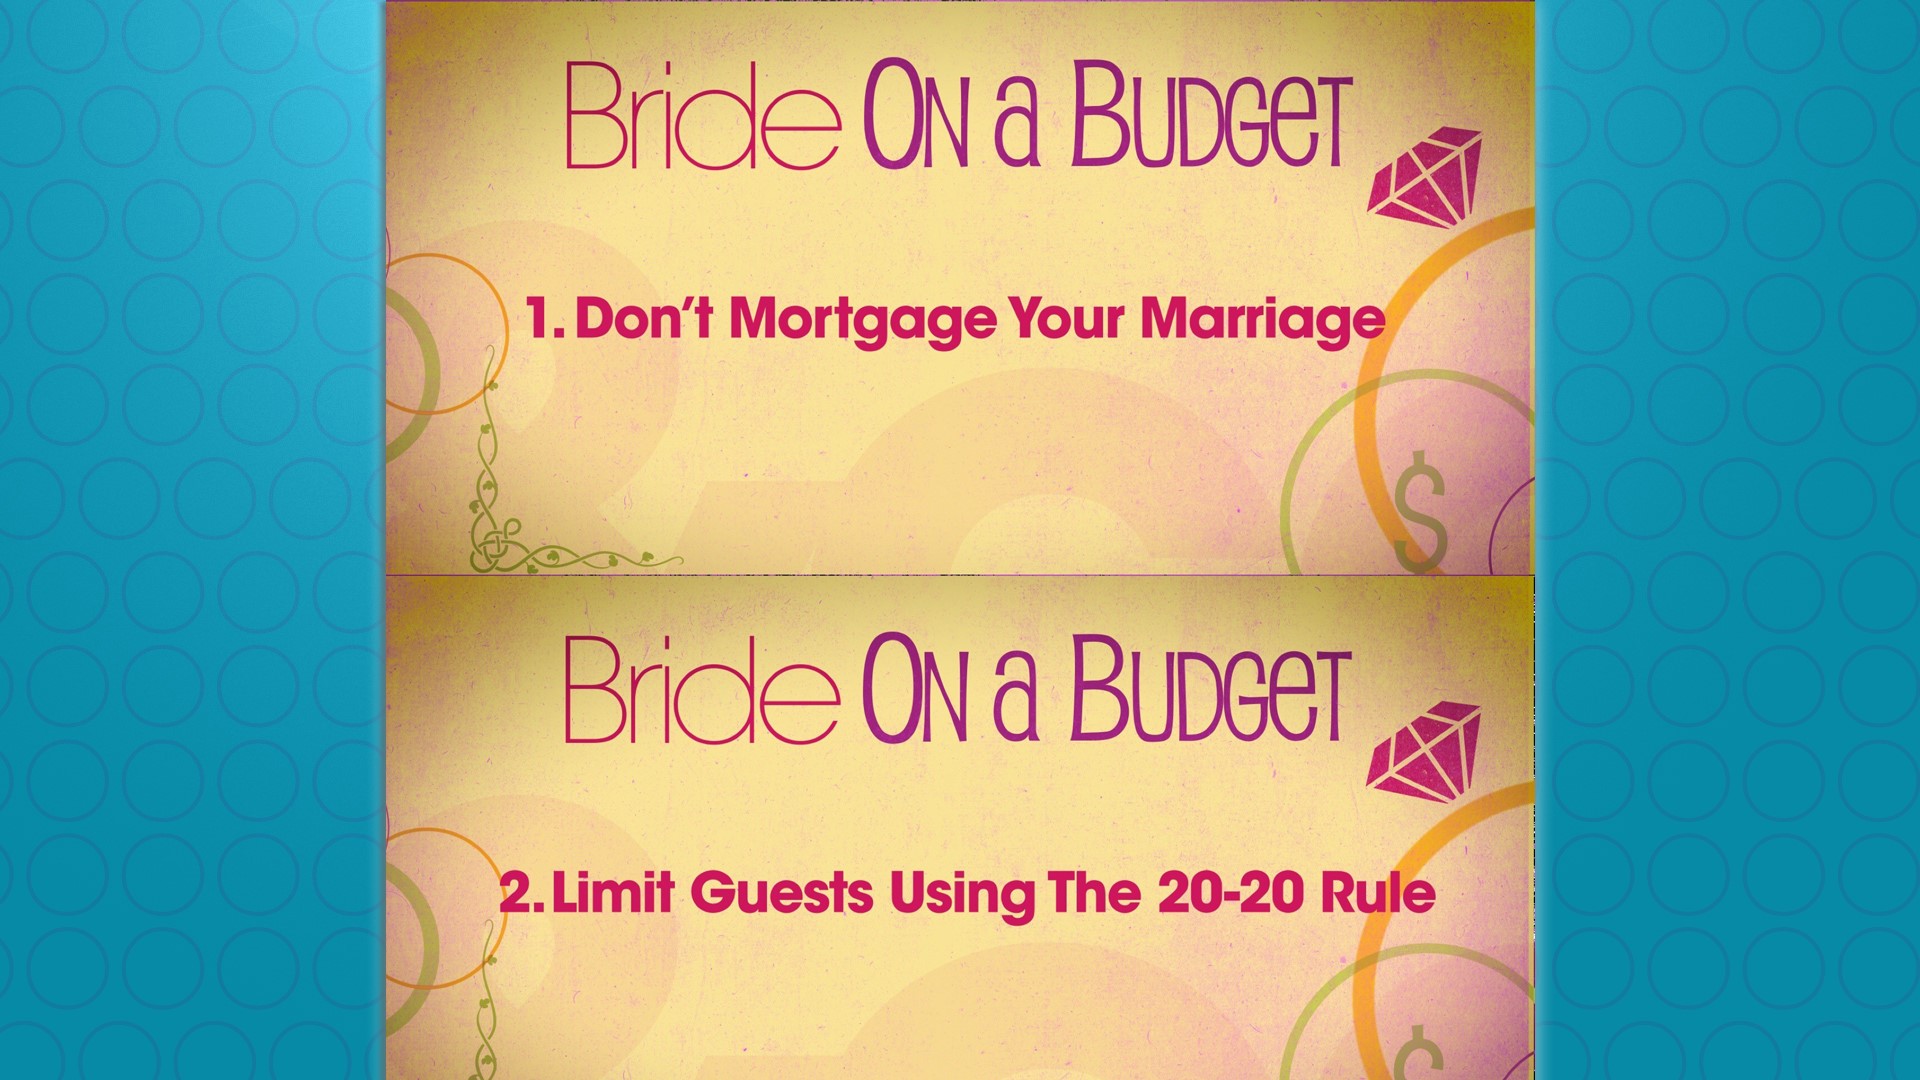 Tax and financial expert Andrew Poulos shares his top ten tips for a bride on a budget:  1. DON'T MORTGAGE YOUR MARRIAGE
2. LIMIT GUEST LIST USING THE 20-20 RULE
3. GO PAPERLESS
4. PICK AN UNPOPULAR DATE
5. MARKET YOUR VENDORS
6. DON'T MENTION THE “W” WORD
7. ASK FOR CASH INSTEAD OF GIFTS
8. CHOOSE A NON-TRADITIONAL VENUE 
9. HAVE THE GUESTS BE THE PHOTOGRAPHERS
10. PAY WITH CASH UP FRONT